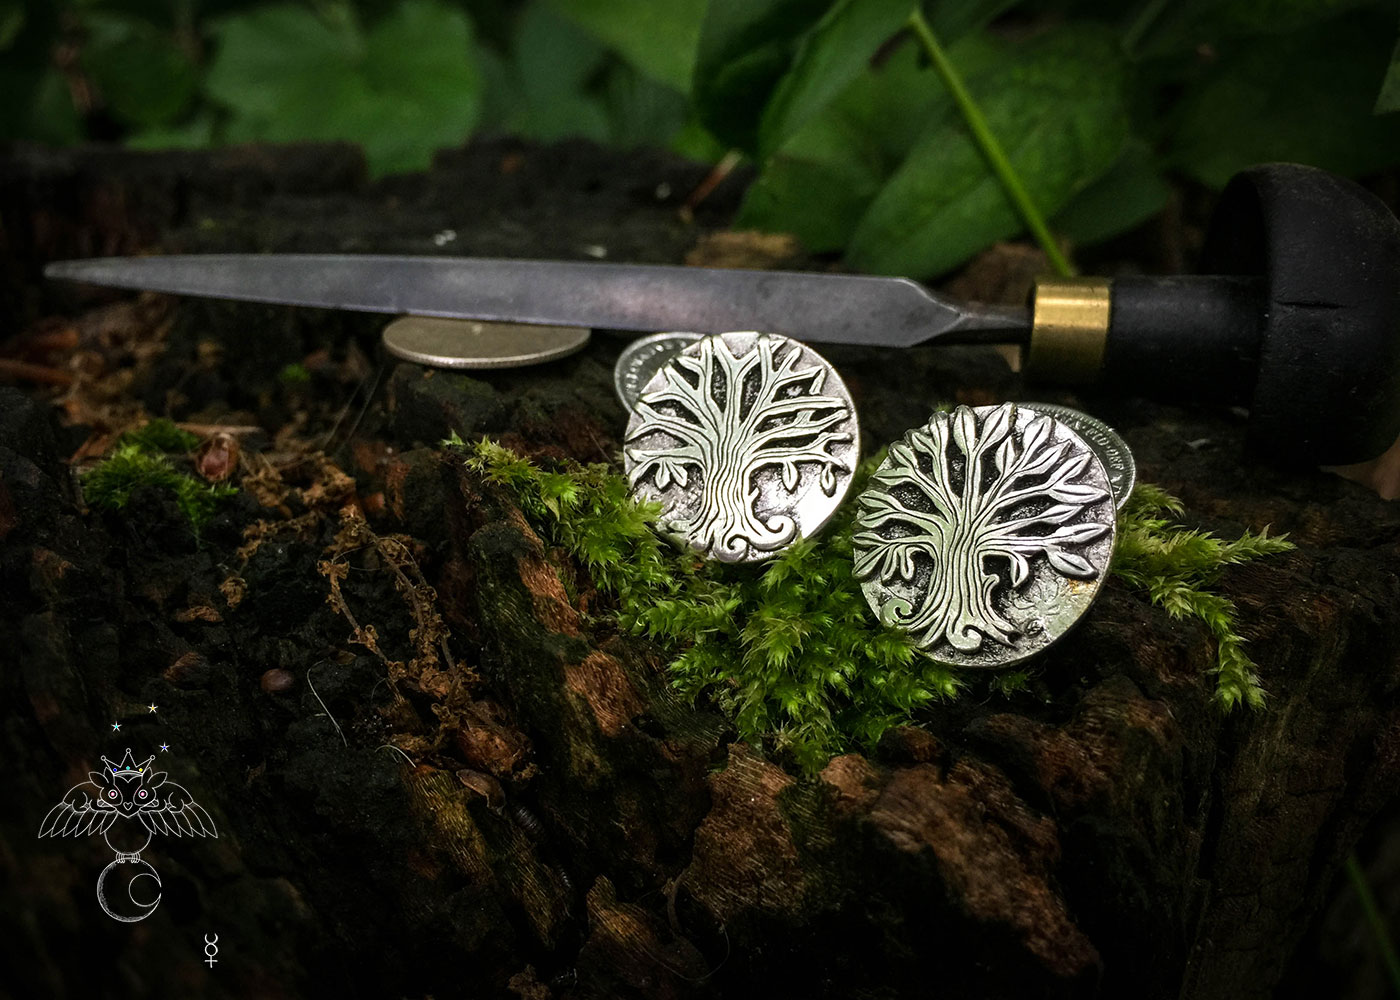 Hairy Growler Jewellery - Silver Tree collection. Tree cufflinks handcrafted and recycled from sterling silver shillings and threepence coins